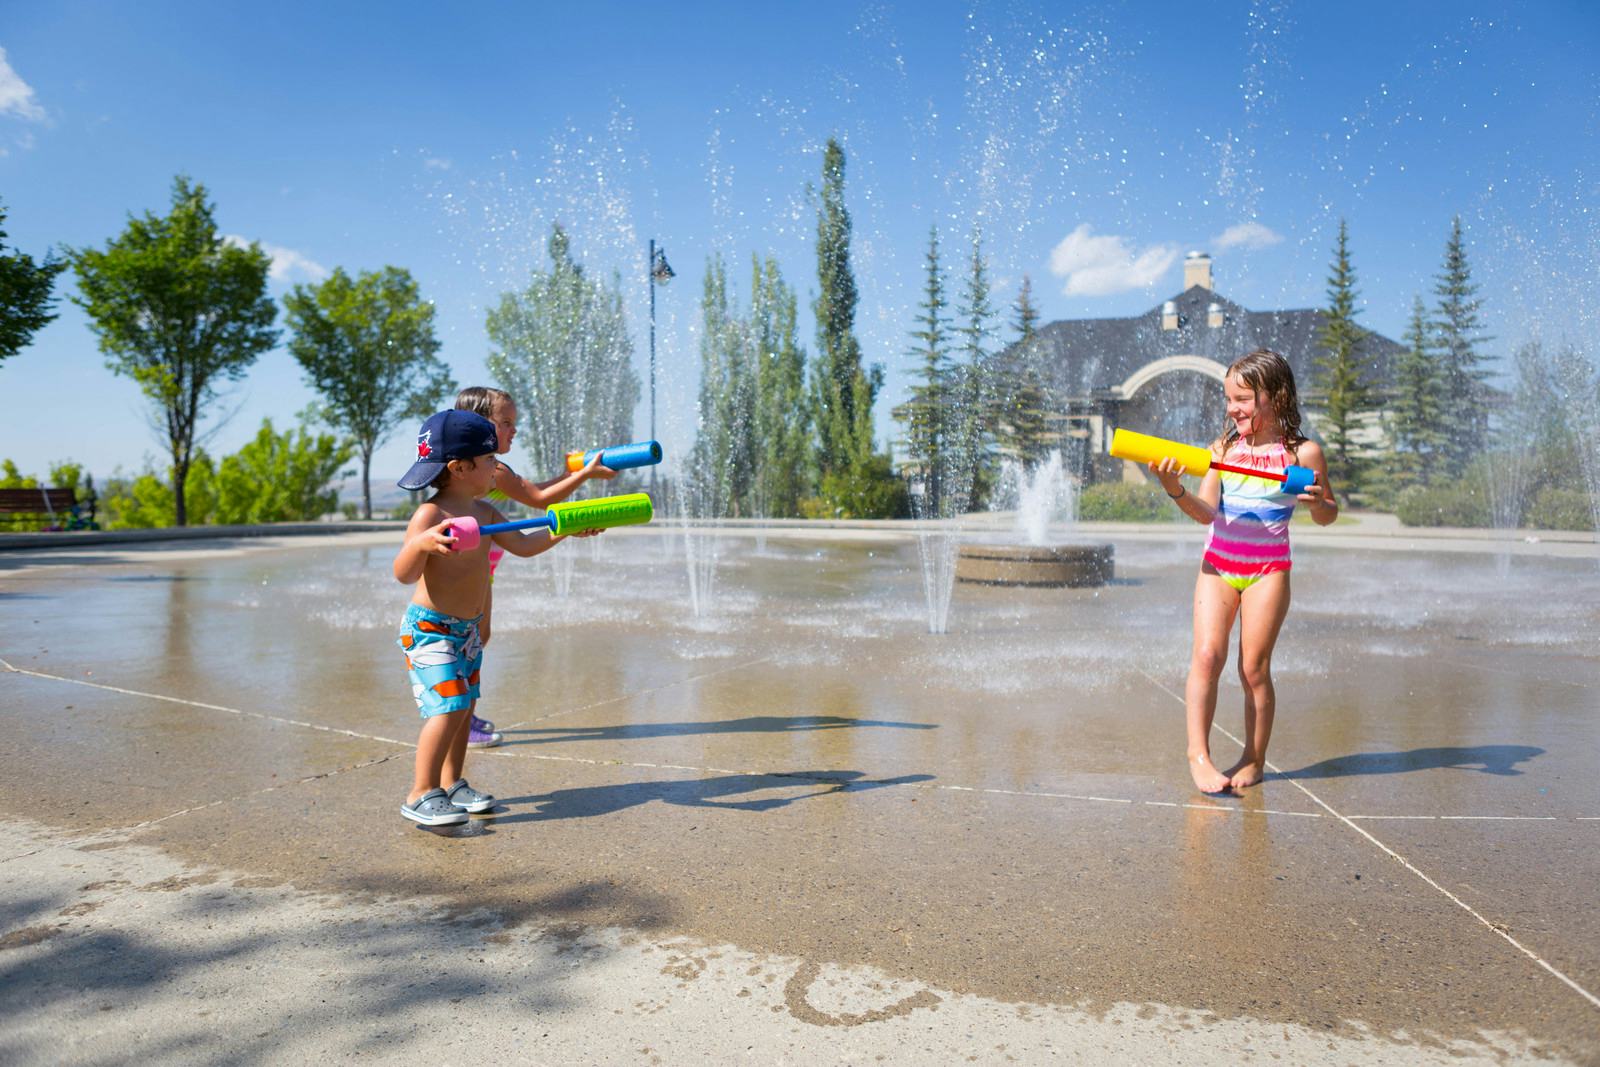 Children playing in a spray park on a summer day